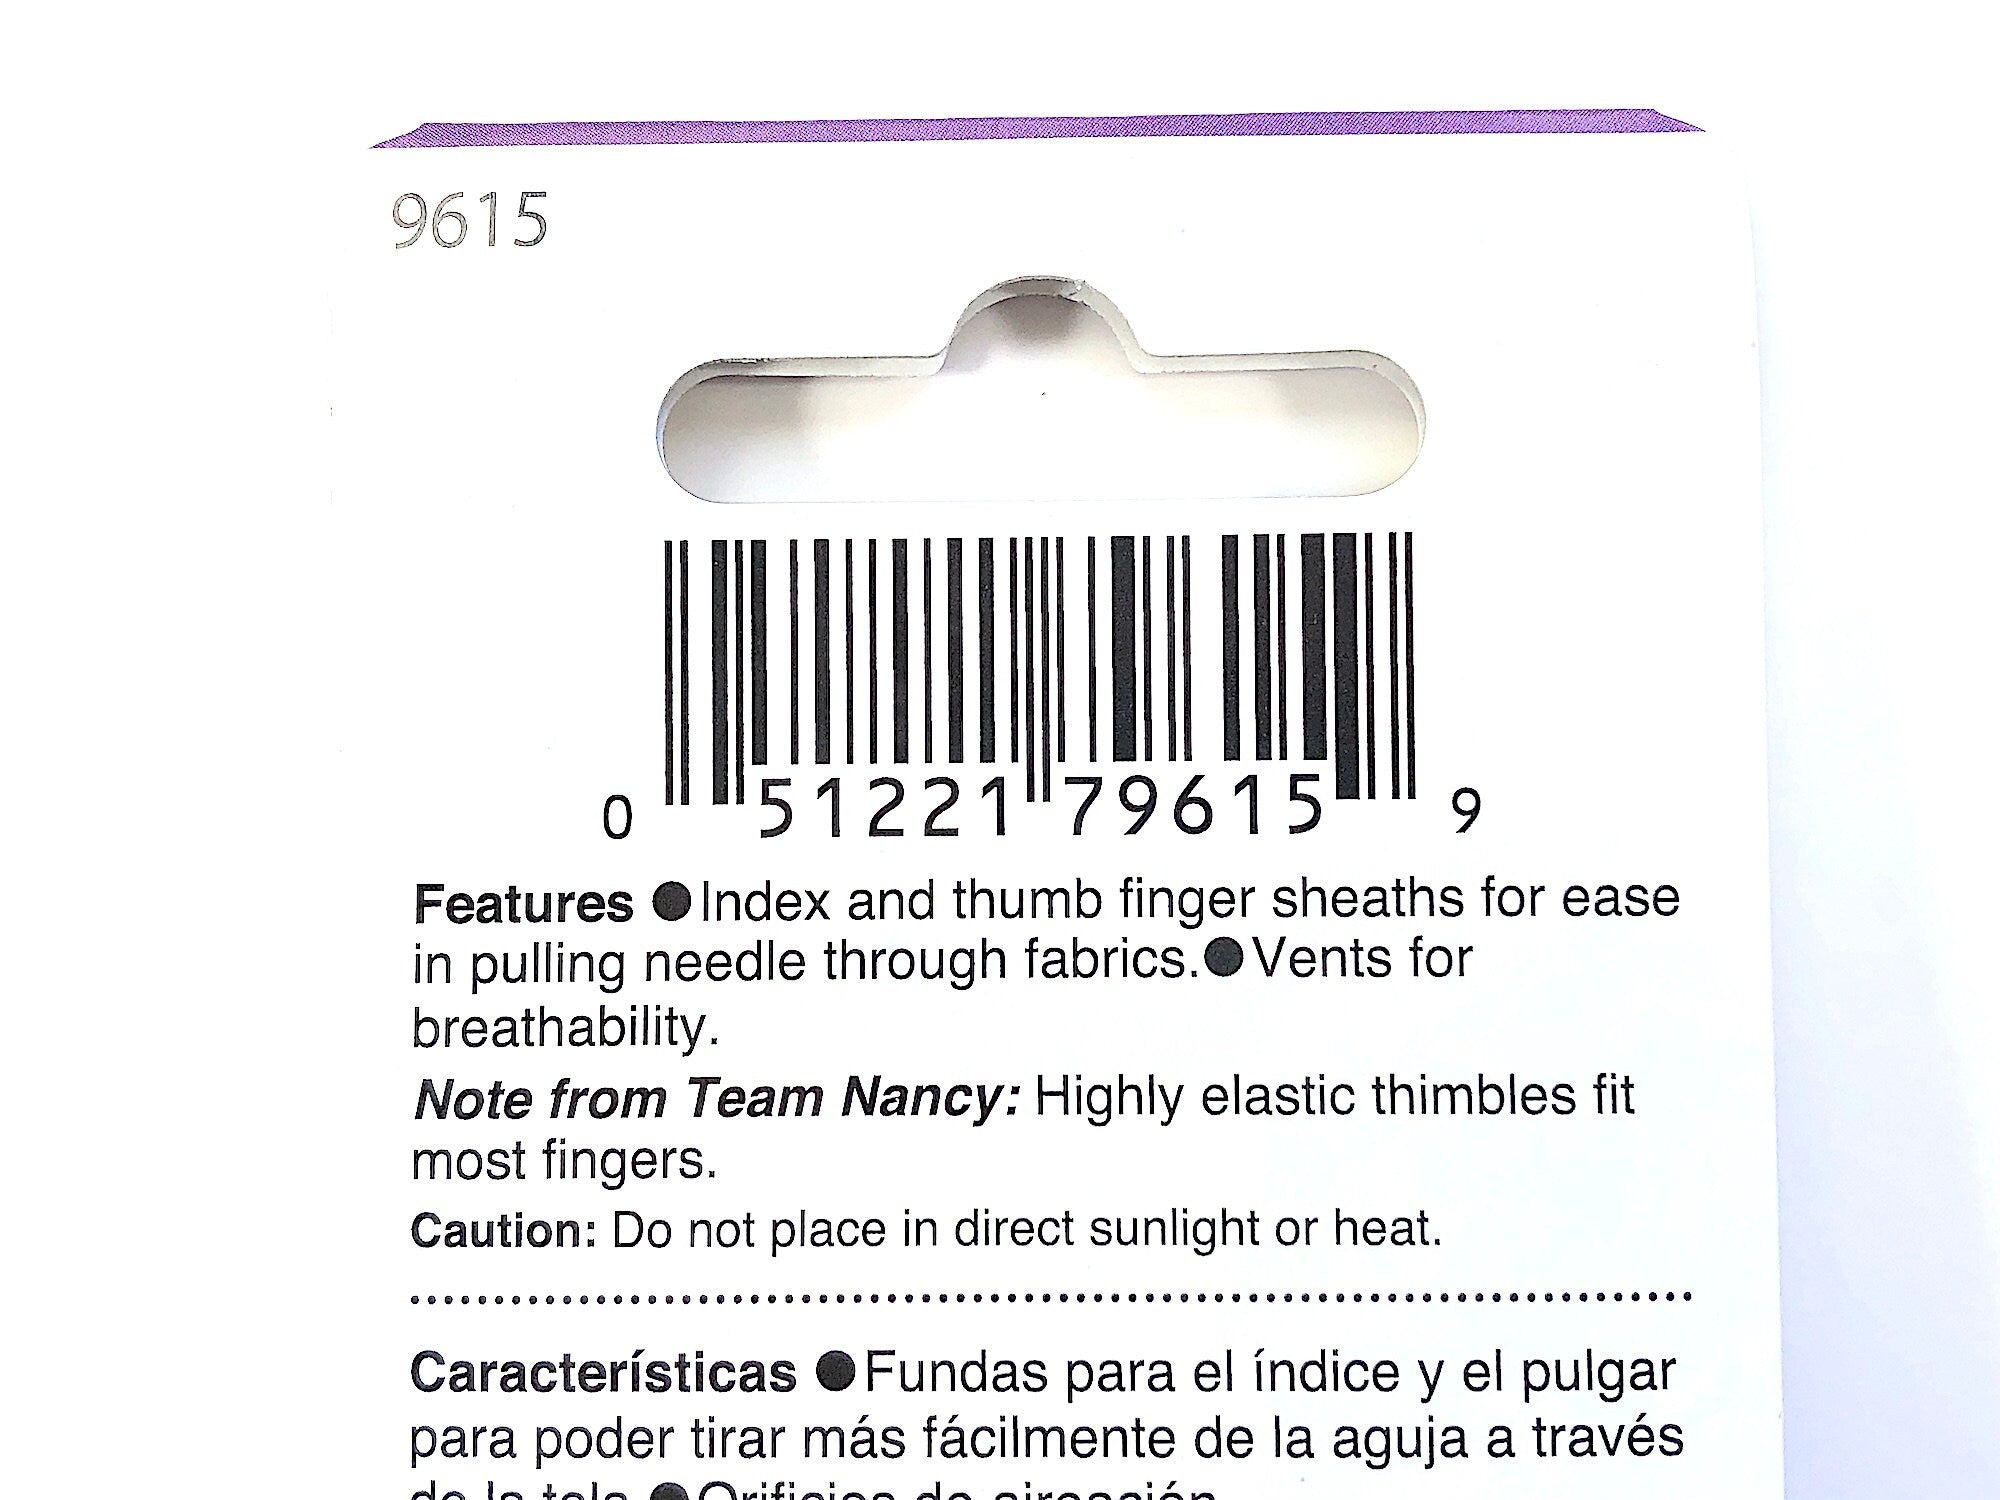 Picture showing the back of the package.